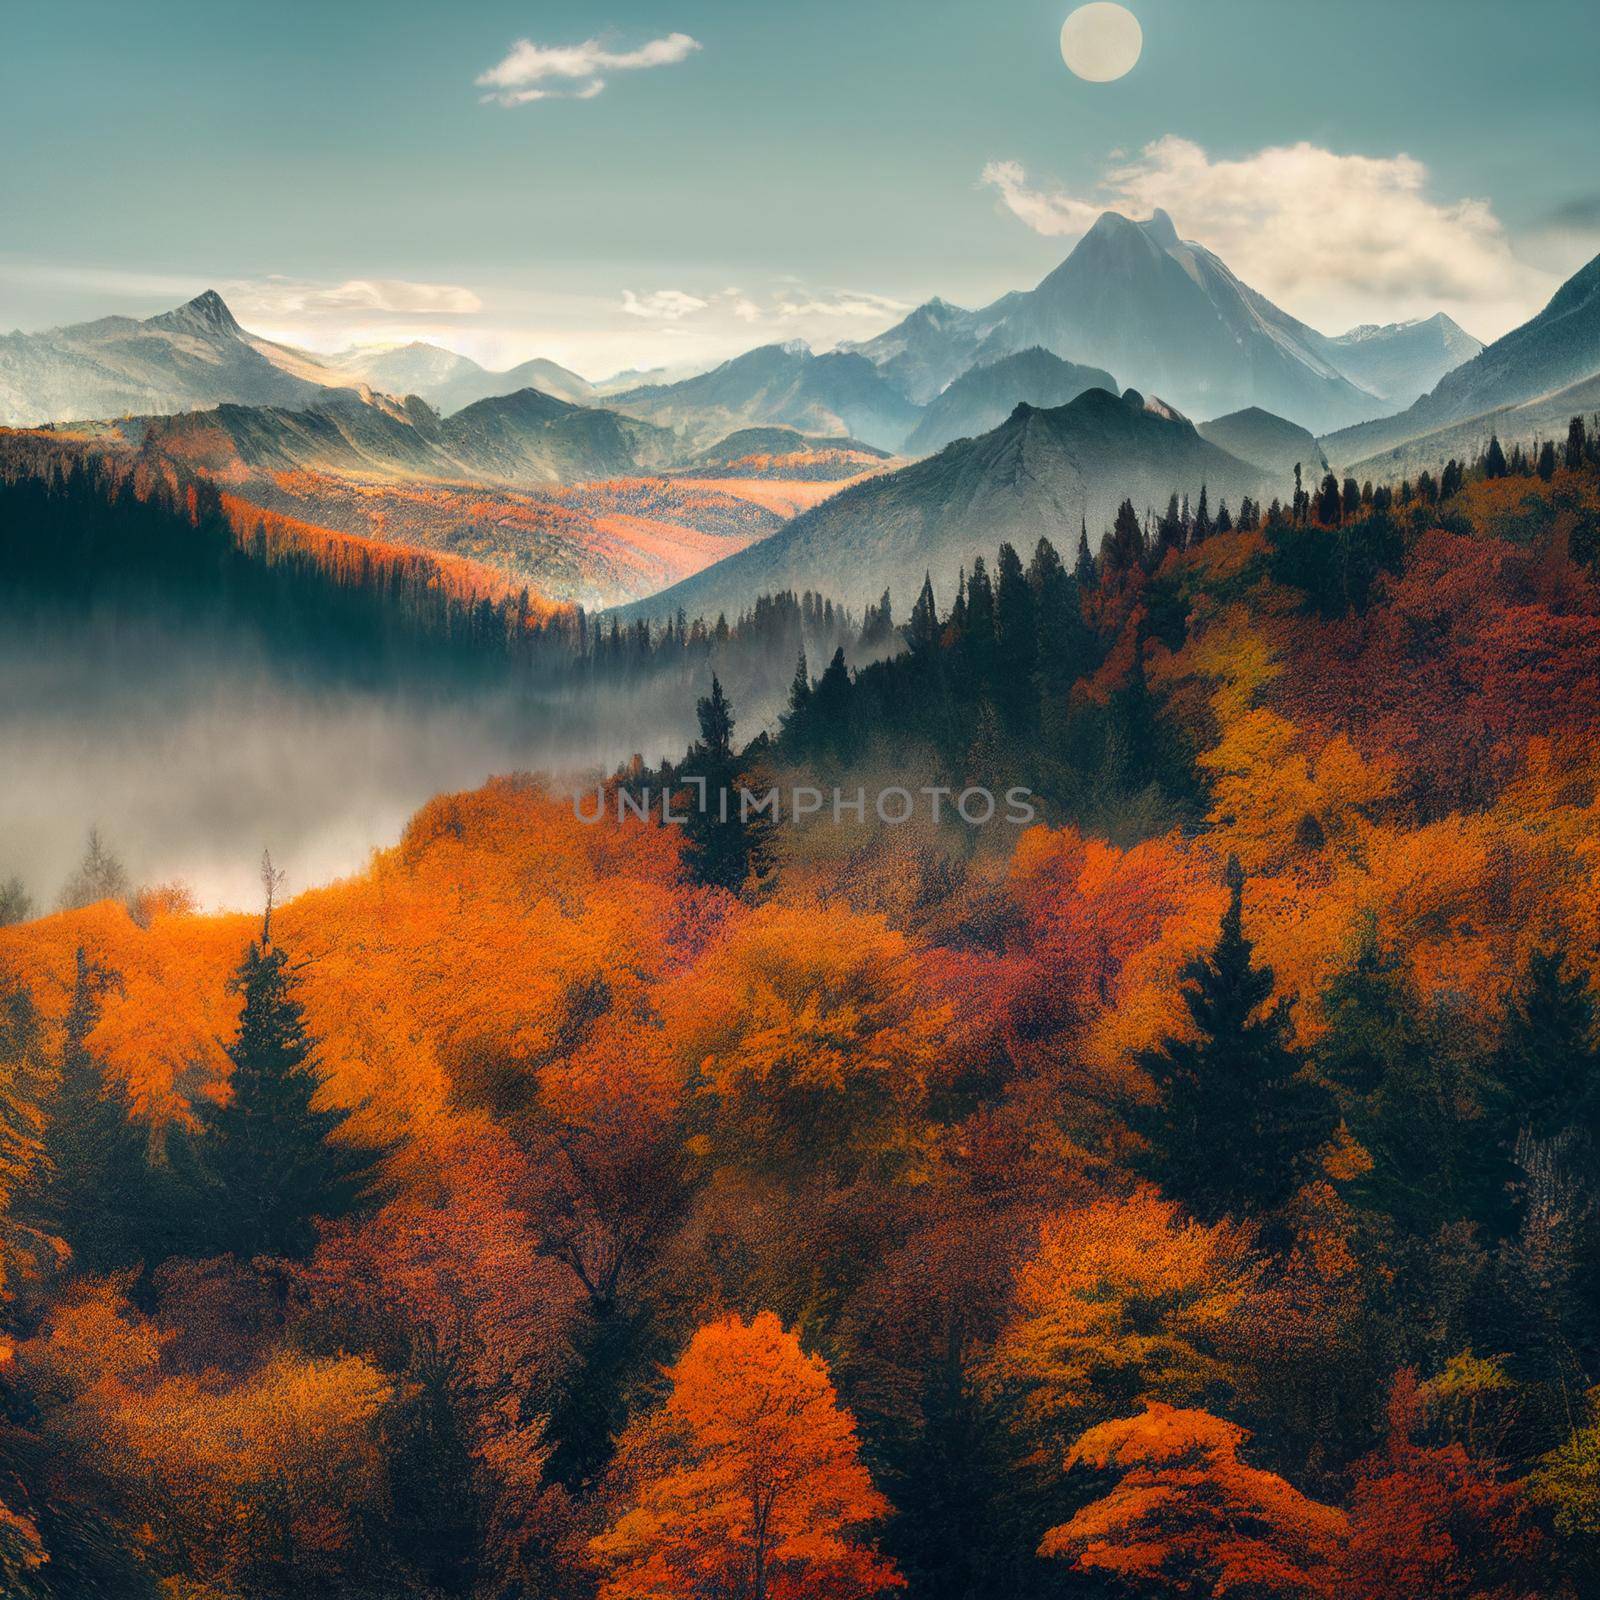 Autumn forest in the mountains by NeuroSky